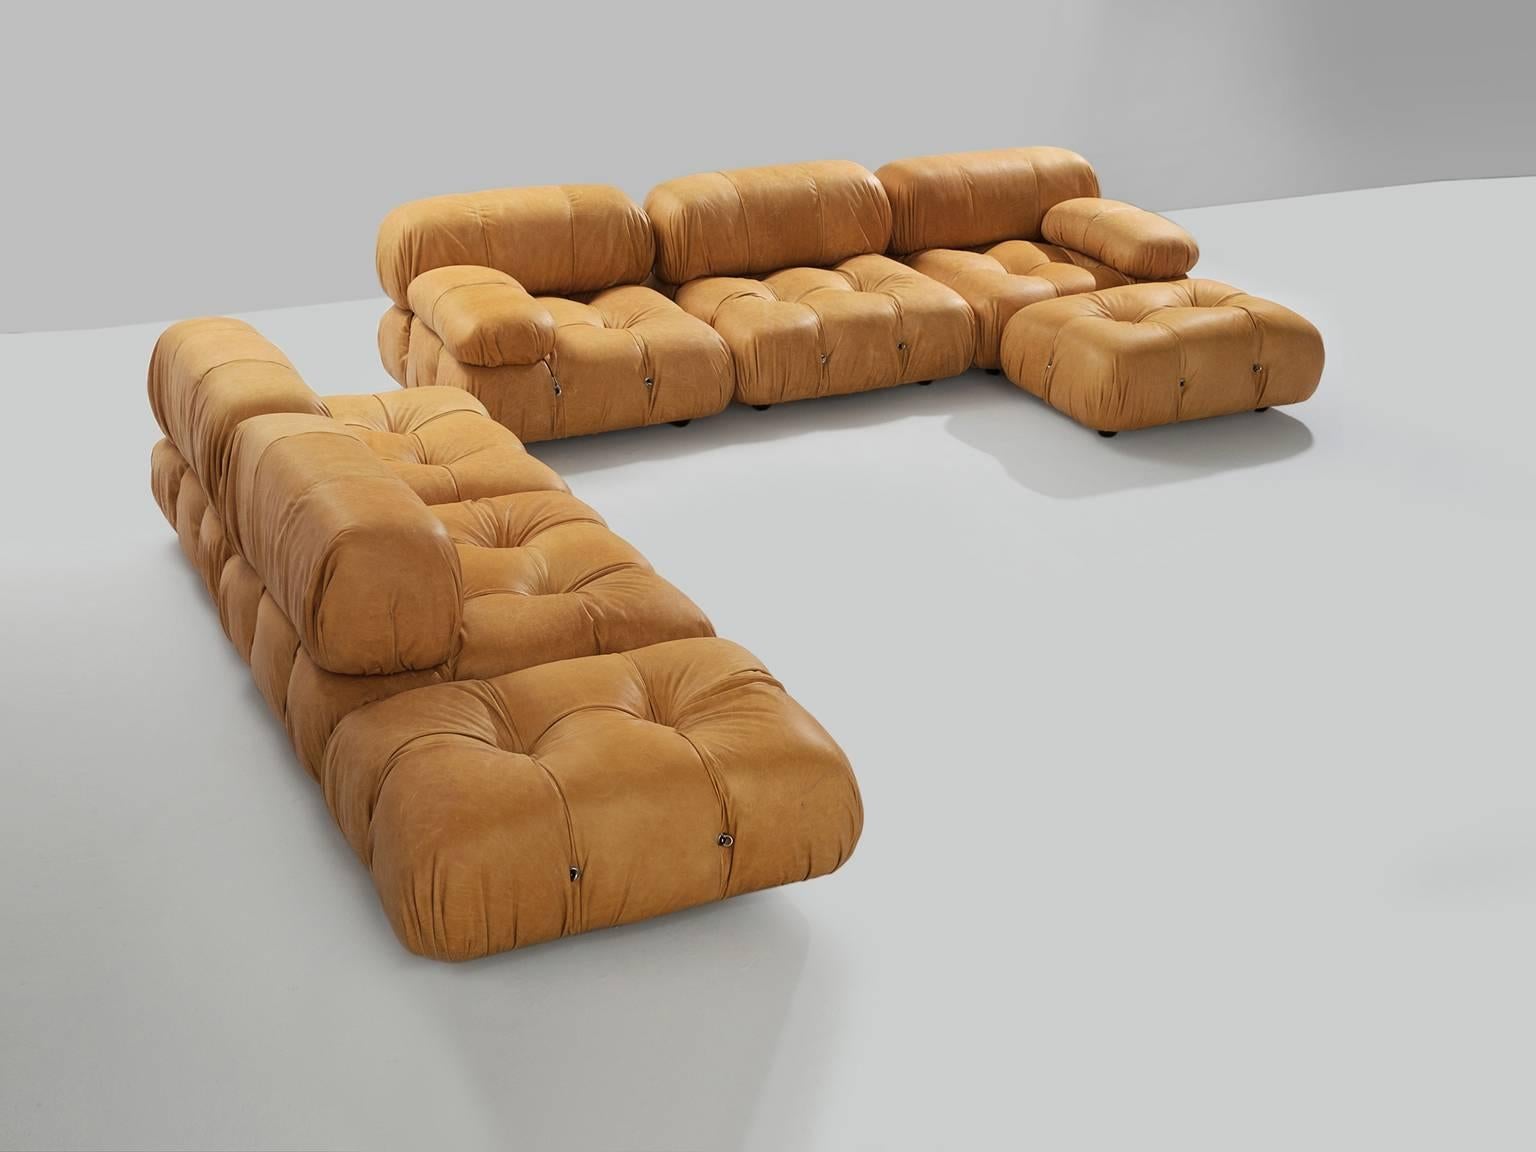 Large modular 'Cameleonda' sofa, in cognac leather upholstery by Mario Bellini for B&B Italia, Italy, 1972.

The sectional elements this sofa was made with, can be used freely and apart from one another. The backs and armrests are provided with